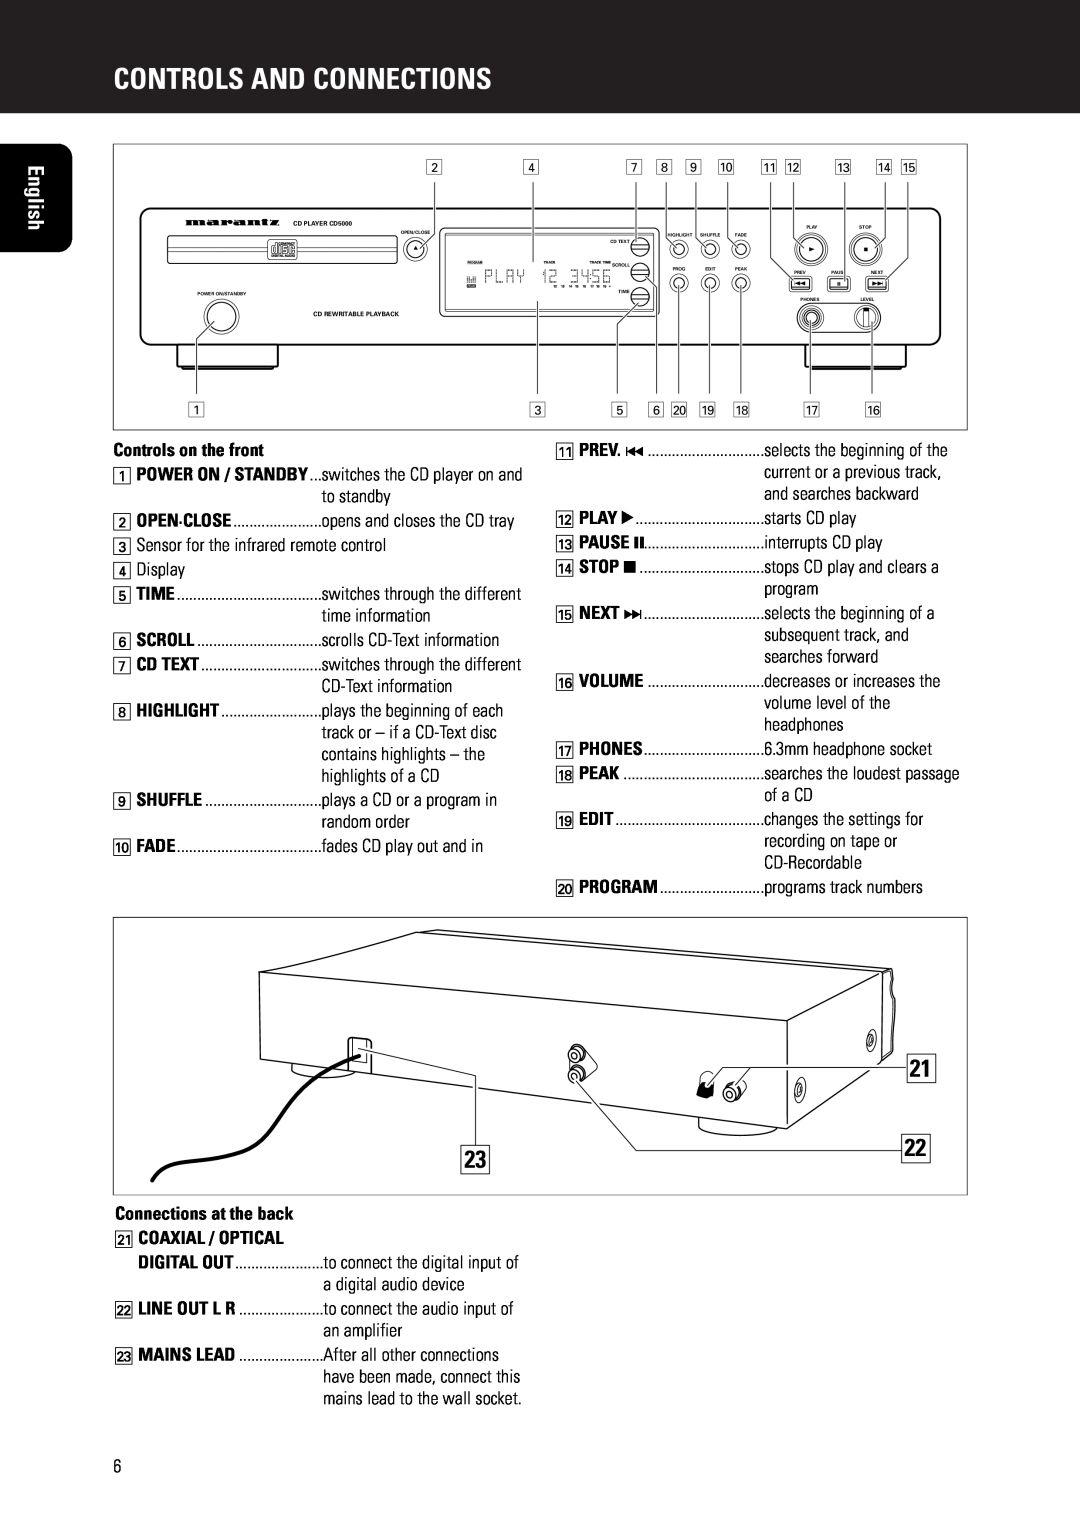 Marantz CD5000 manual Controls And Connections, English, Controls on the front, Connections at the back ¡COAXIAL / OPTICAL 